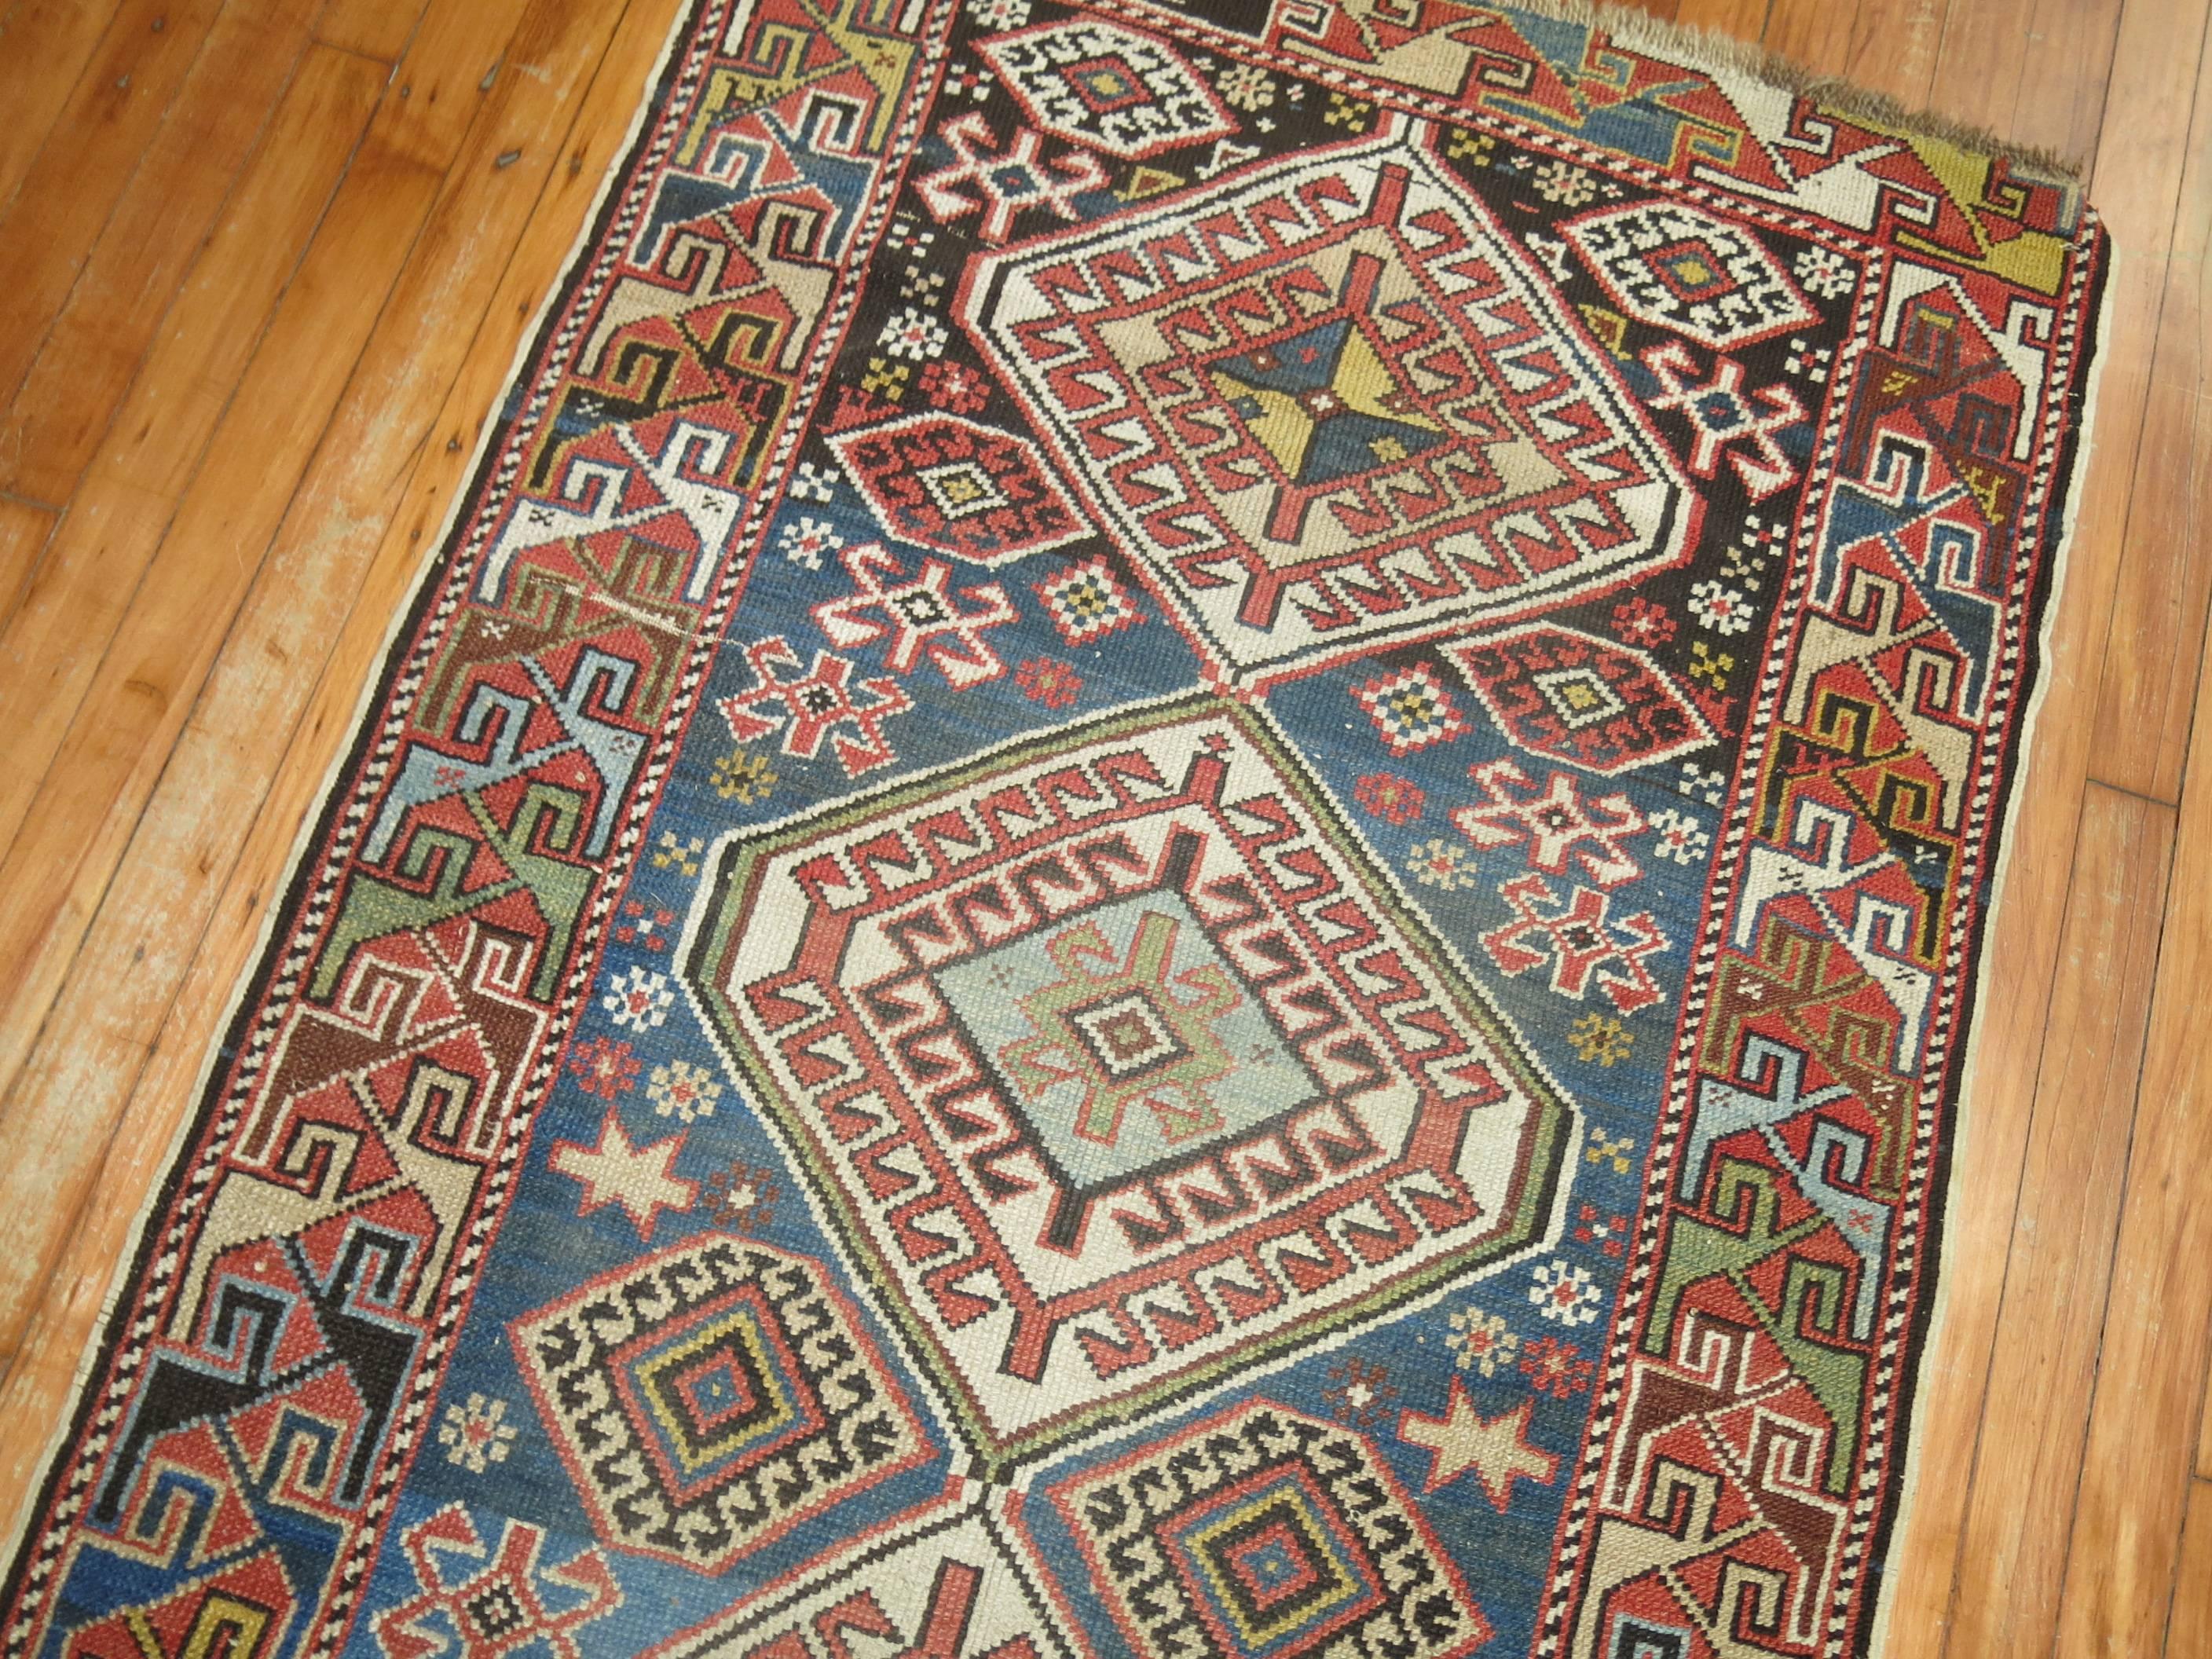 An early 20th century Caucasian rug at a modest price.